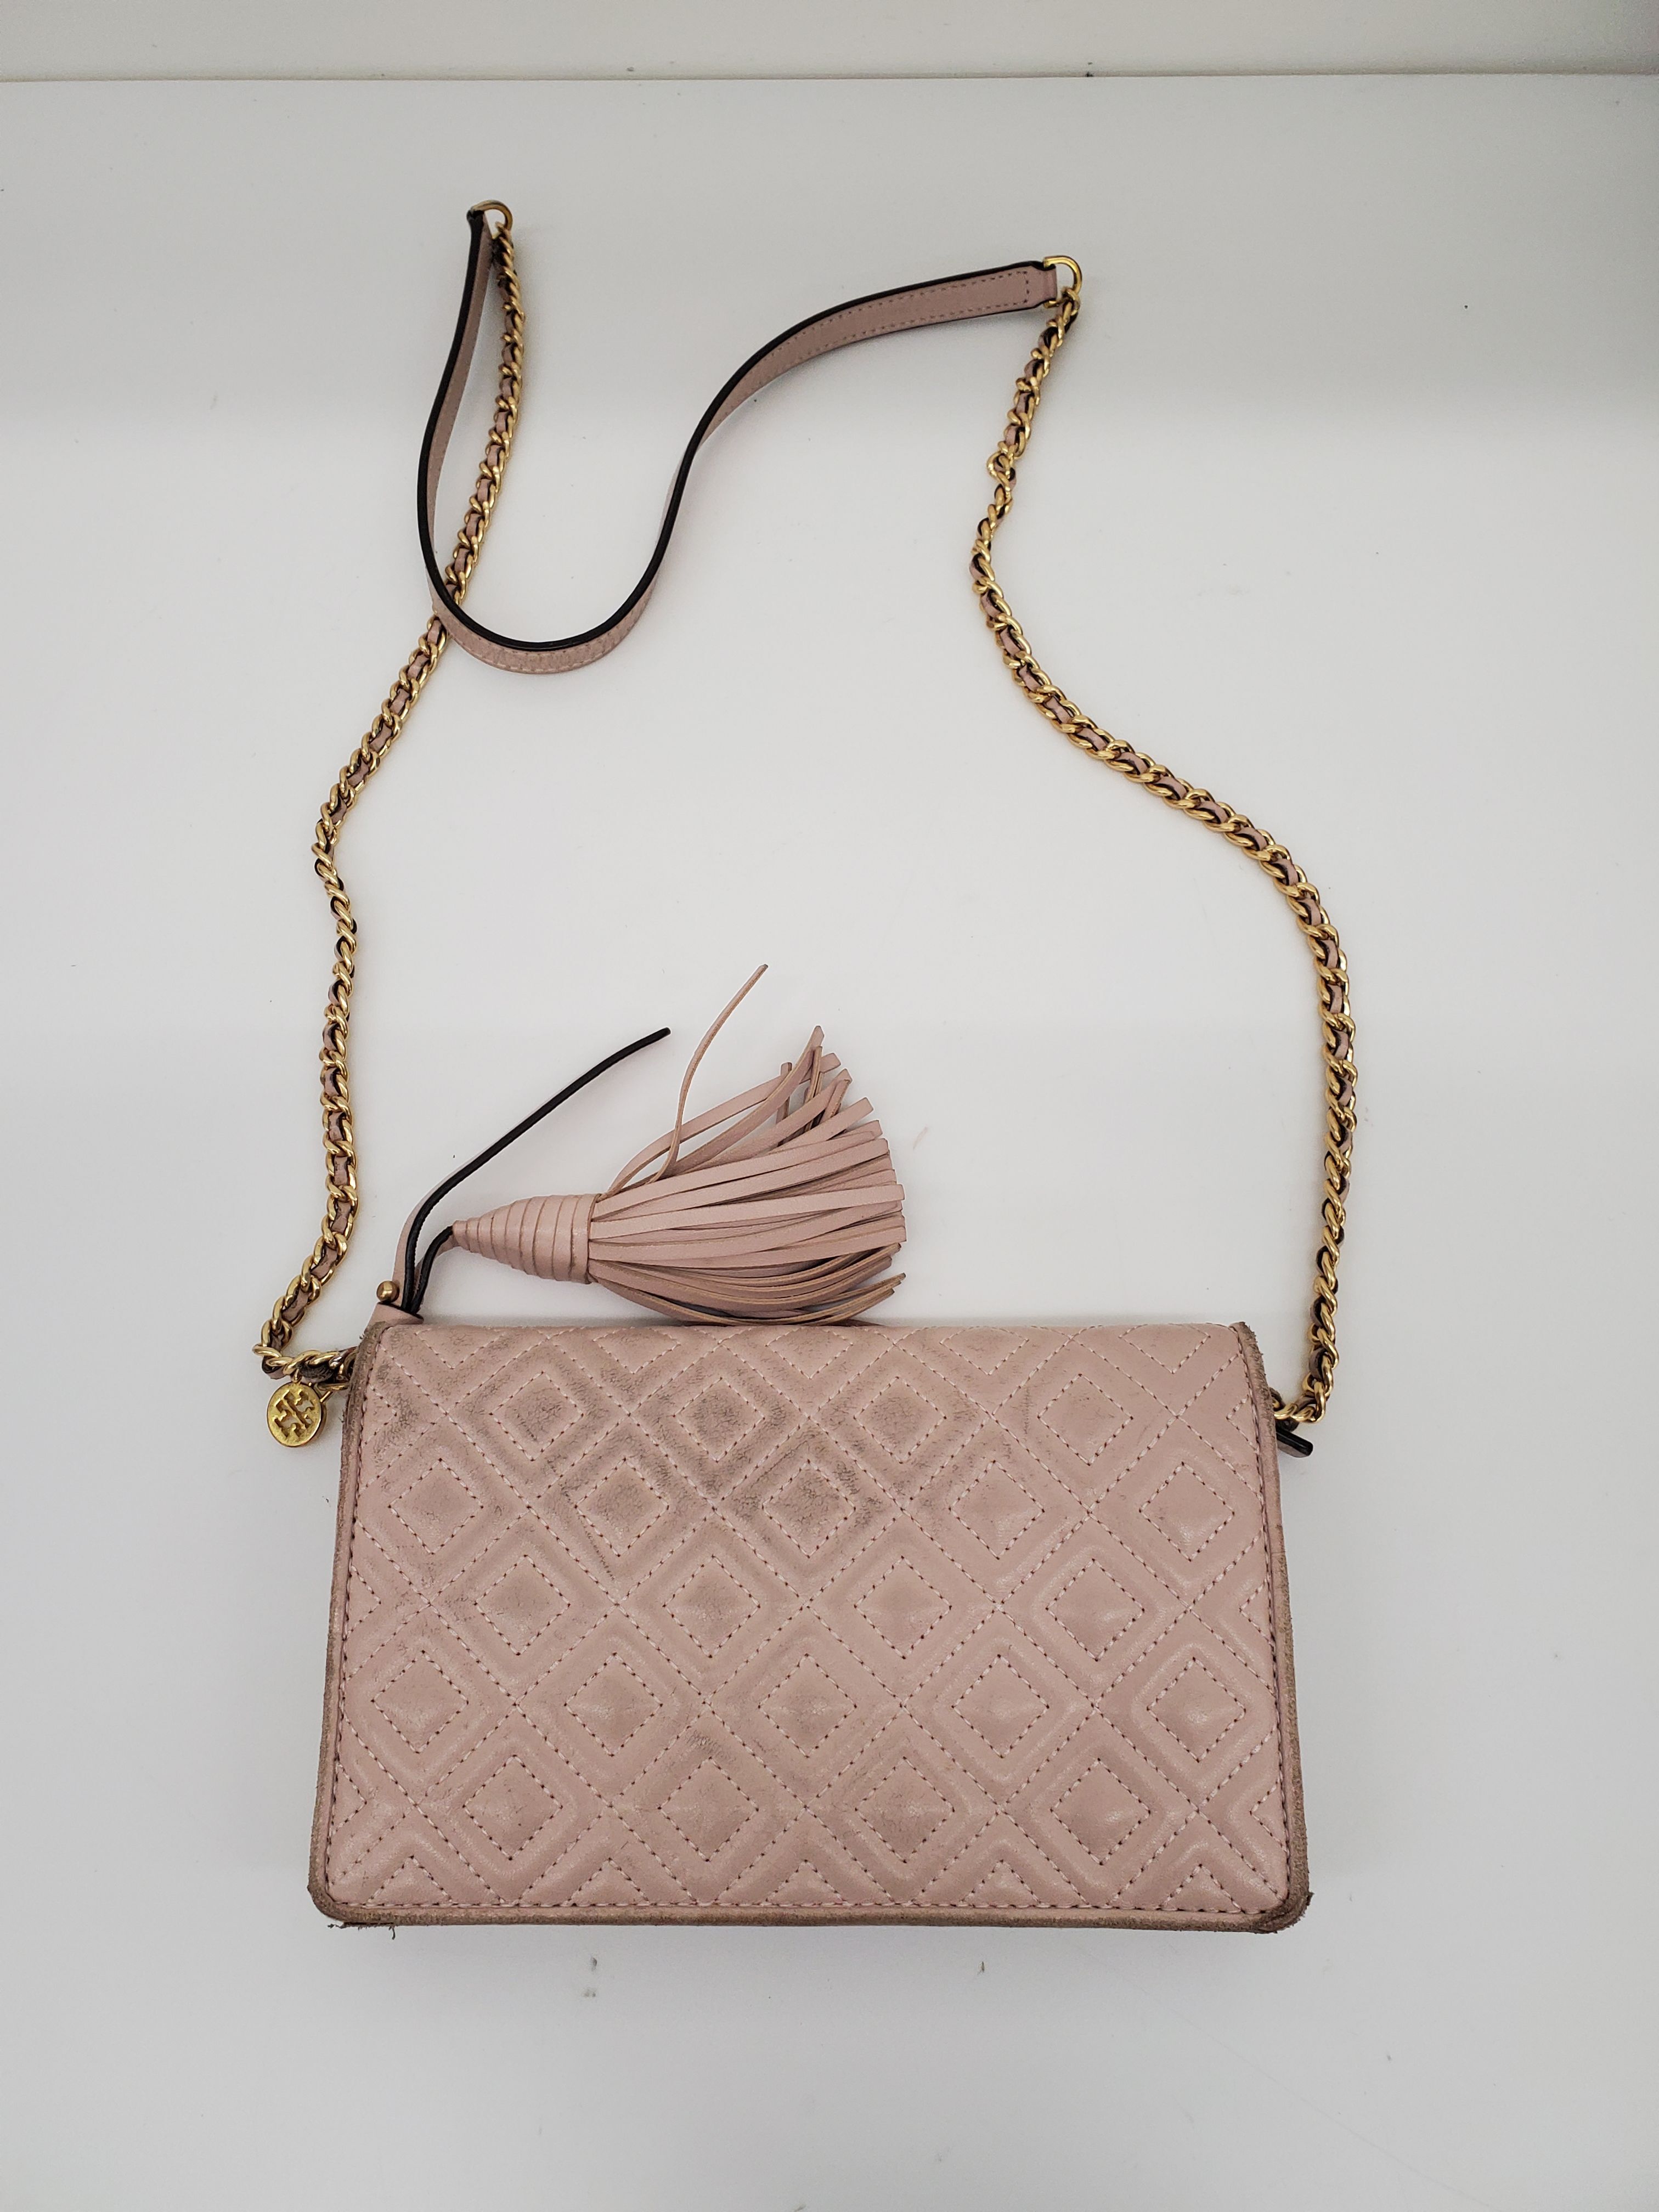 Clay Co. Vendors - Never used Tory Burch purse with wallet and key chain  $400 | Facebook